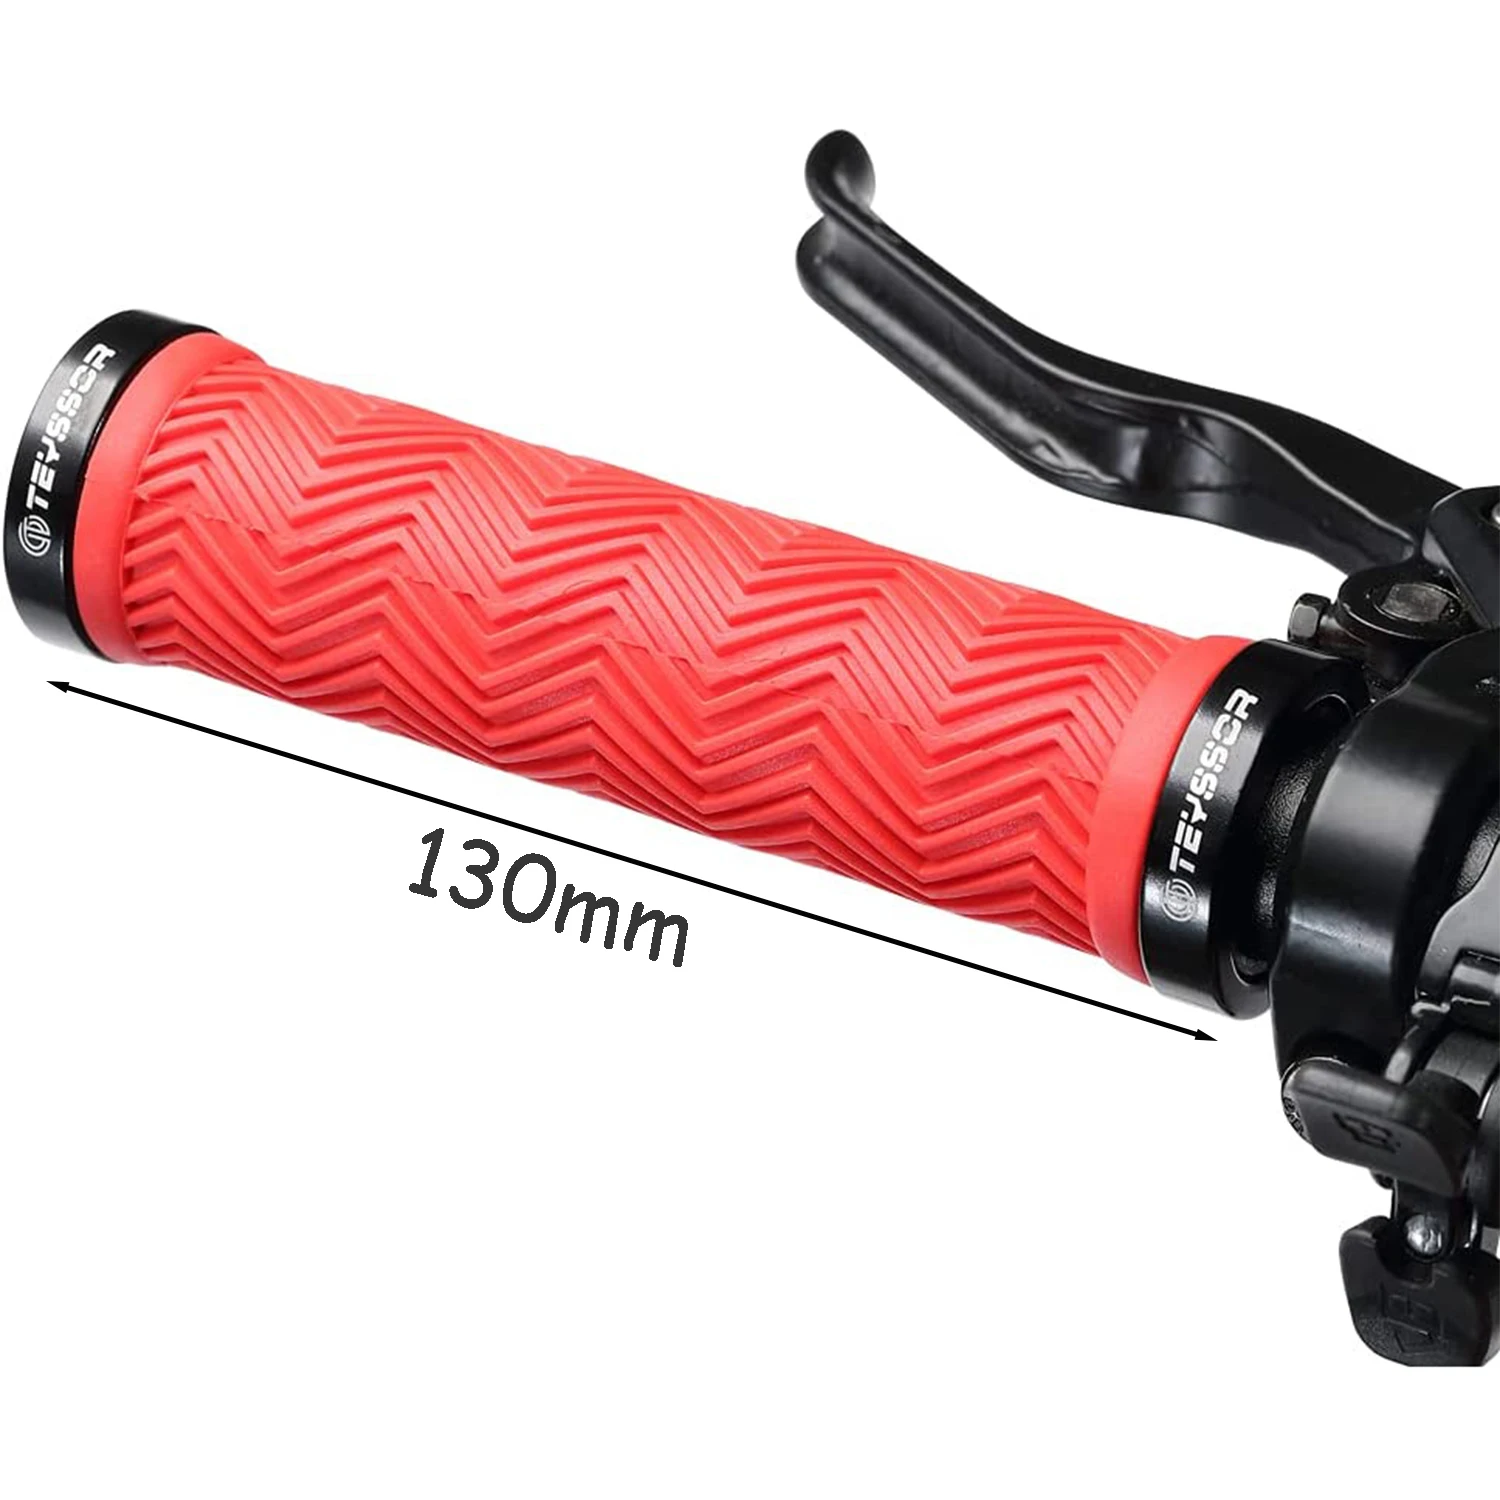 Mountain Bike Grips Double Lock on, Non-Slip Shock Absorbing Bicycle Handlebar Grips 130mm for MTB Downhill